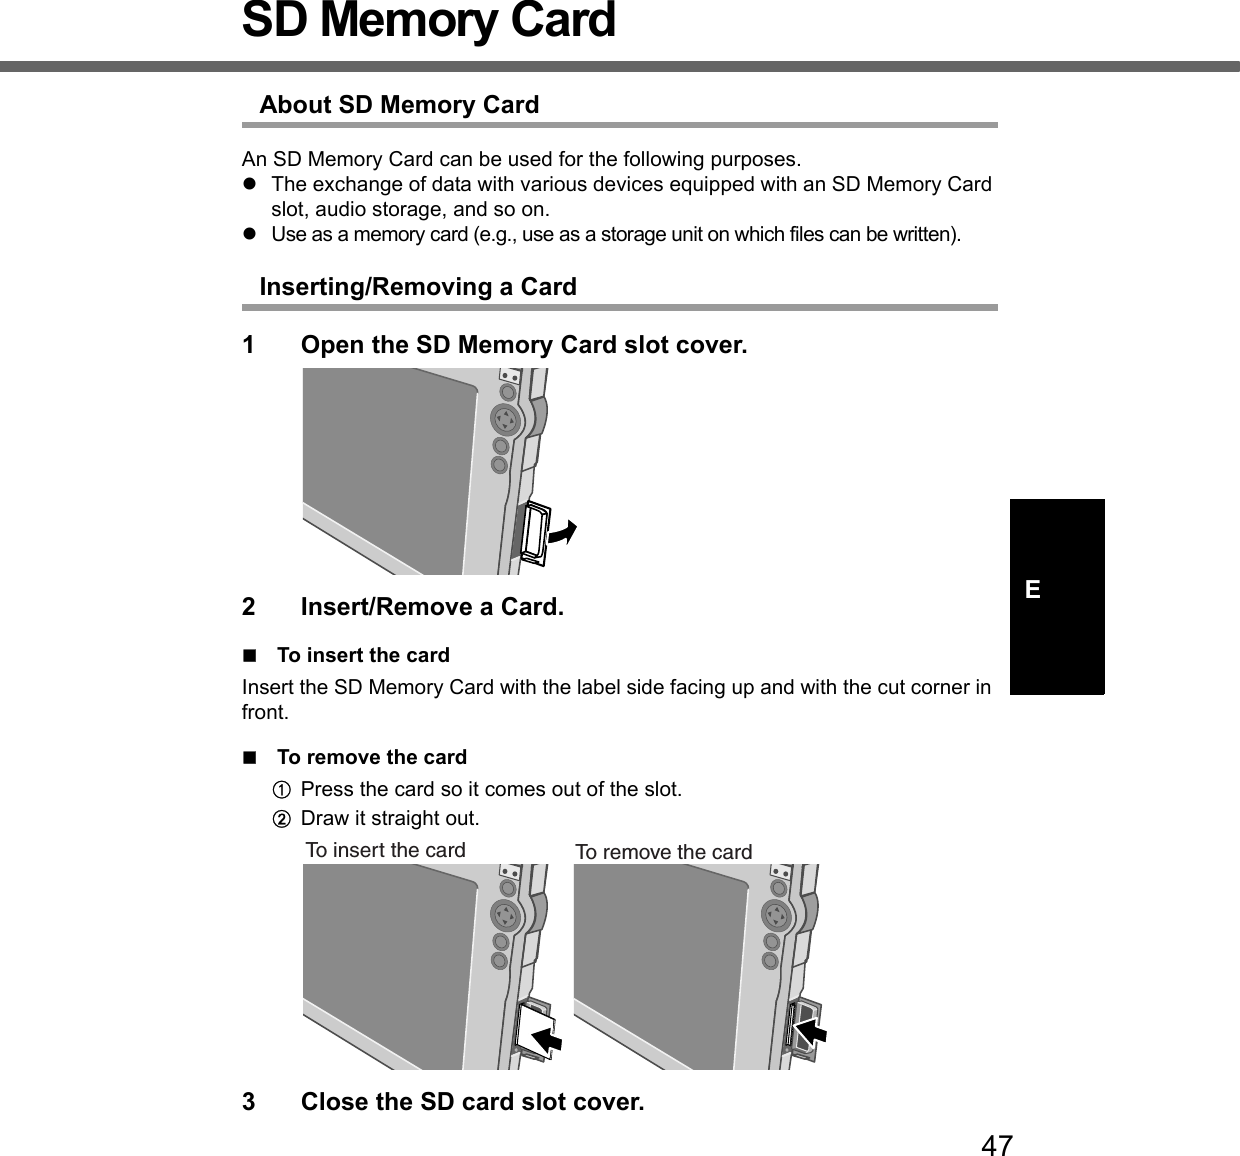 47ESD Memory CardAbout SD Memory CardAn SD Memory Card can be used for the following purposes.zThe exchange of data with various devices equipped with an SD Memory Card slot, audio storage, and so on.zUse as a memory card (e.g., use as a storage unit on which files can be written).Inserting/Removing a Card1 Open the SD Memory Card slot cover.2 Insert/Remove a Card.To insert the cardInsert the SD Memory Card with the label side facing up and with the cut corner in front.To remove the cardAPress the card so it comes out of the slot.BDraw it straight out.3 Close the SD card slot cover.To insert the card To remove the card